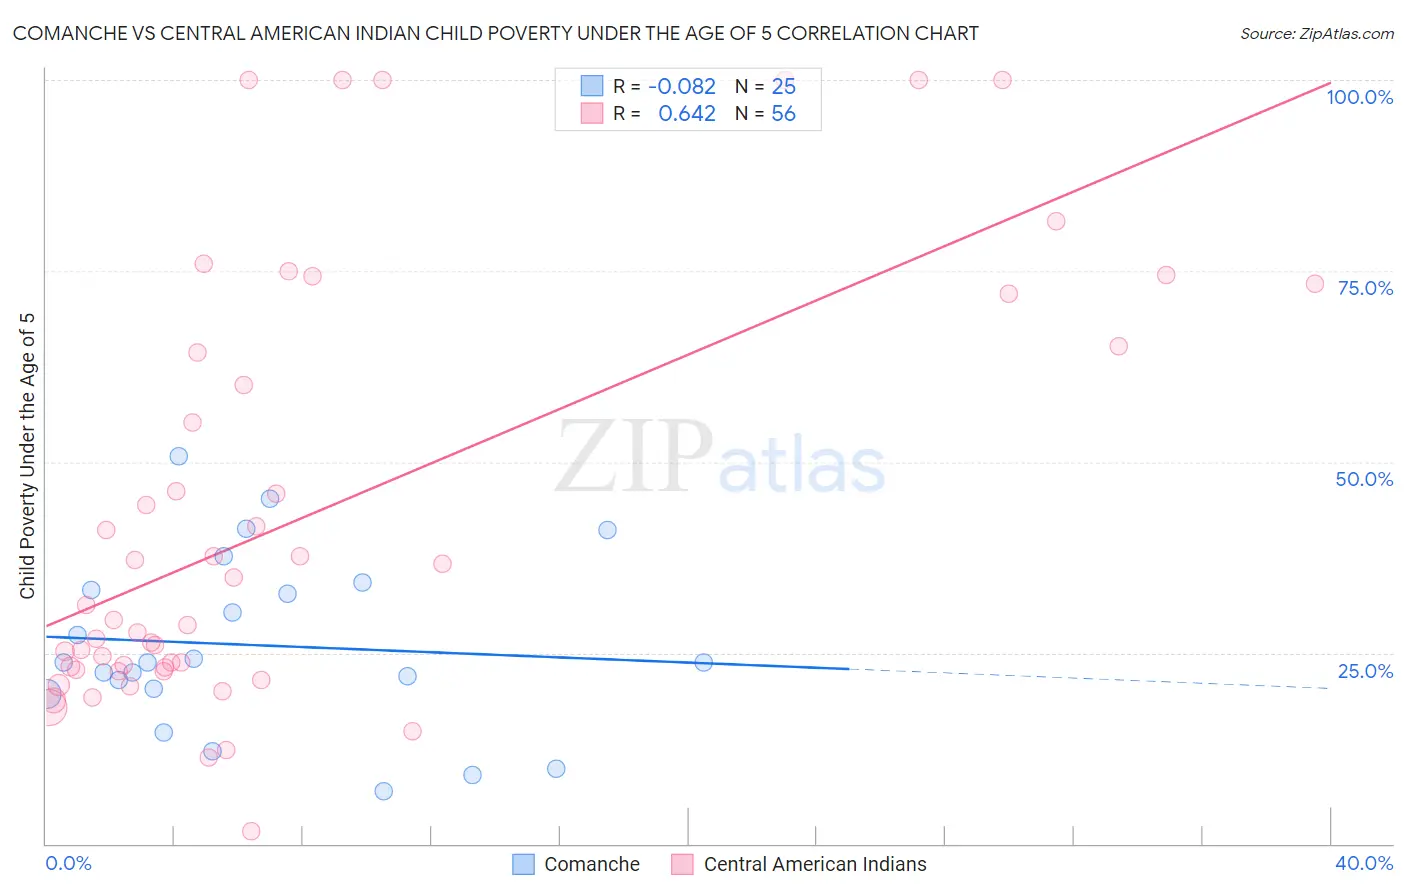 Comanche vs Central American Indian Child Poverty Under the Age of 5